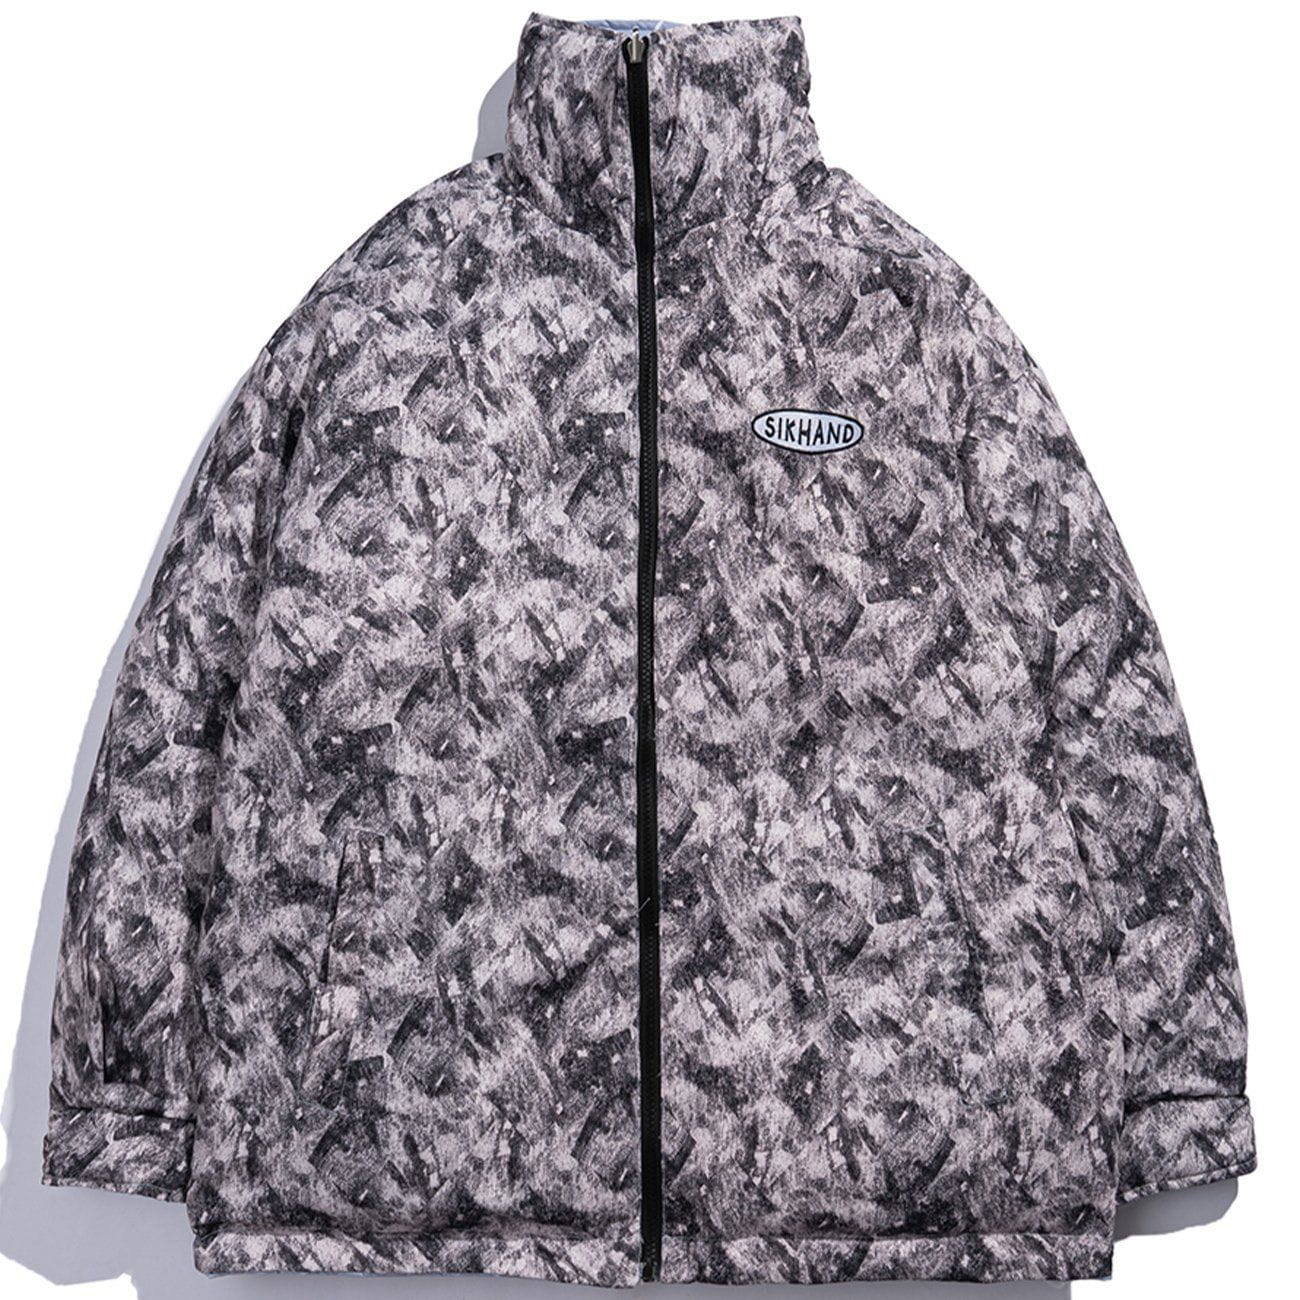 LUXENFY™ - Dyed and Embroidered Reversible Winter Coat luxenfy.com